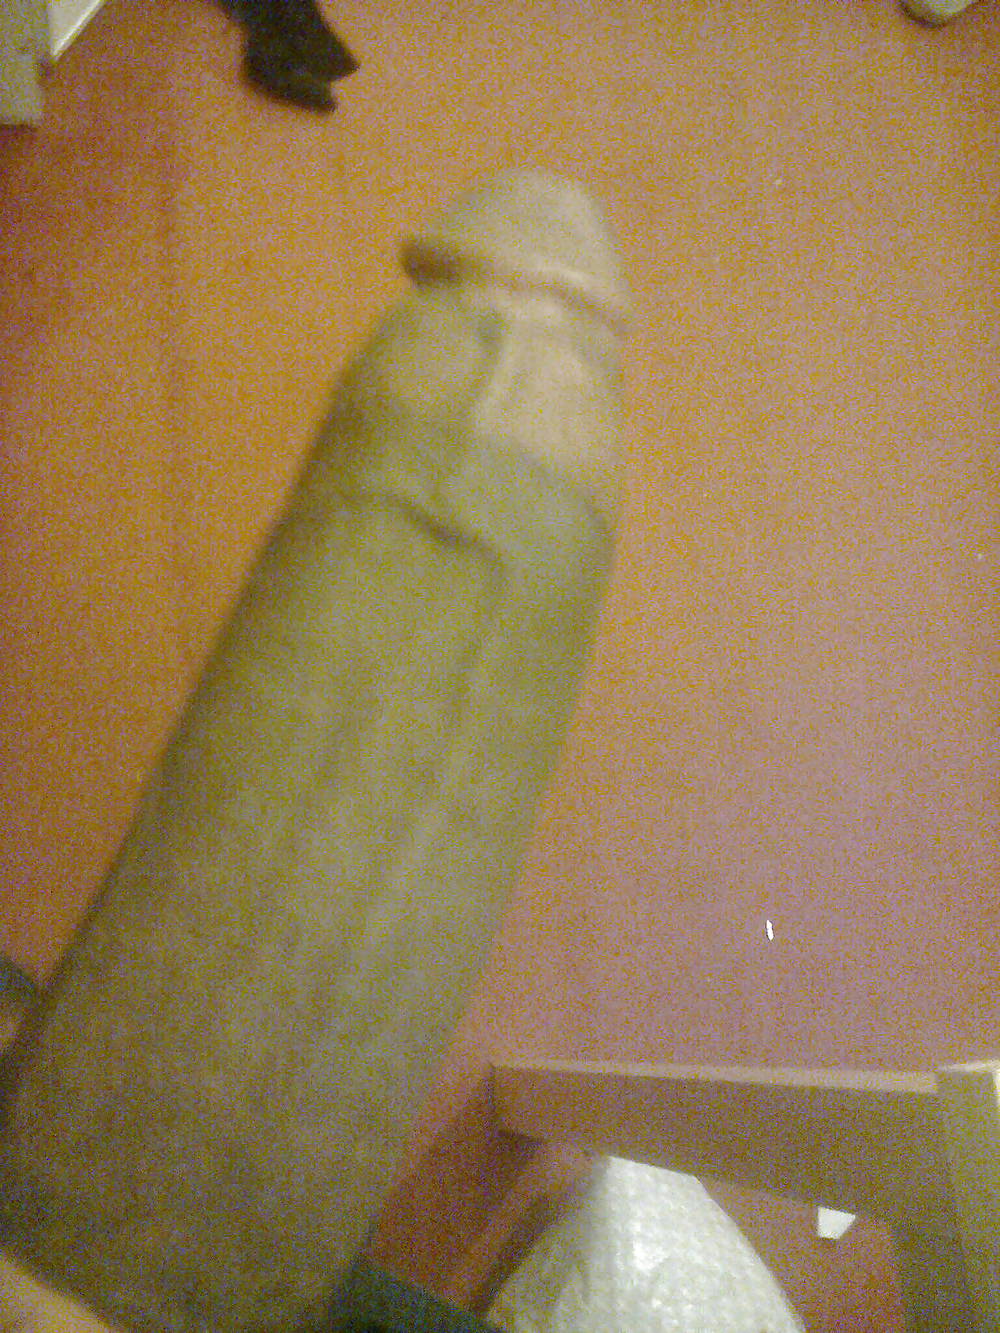 My dick pict gal